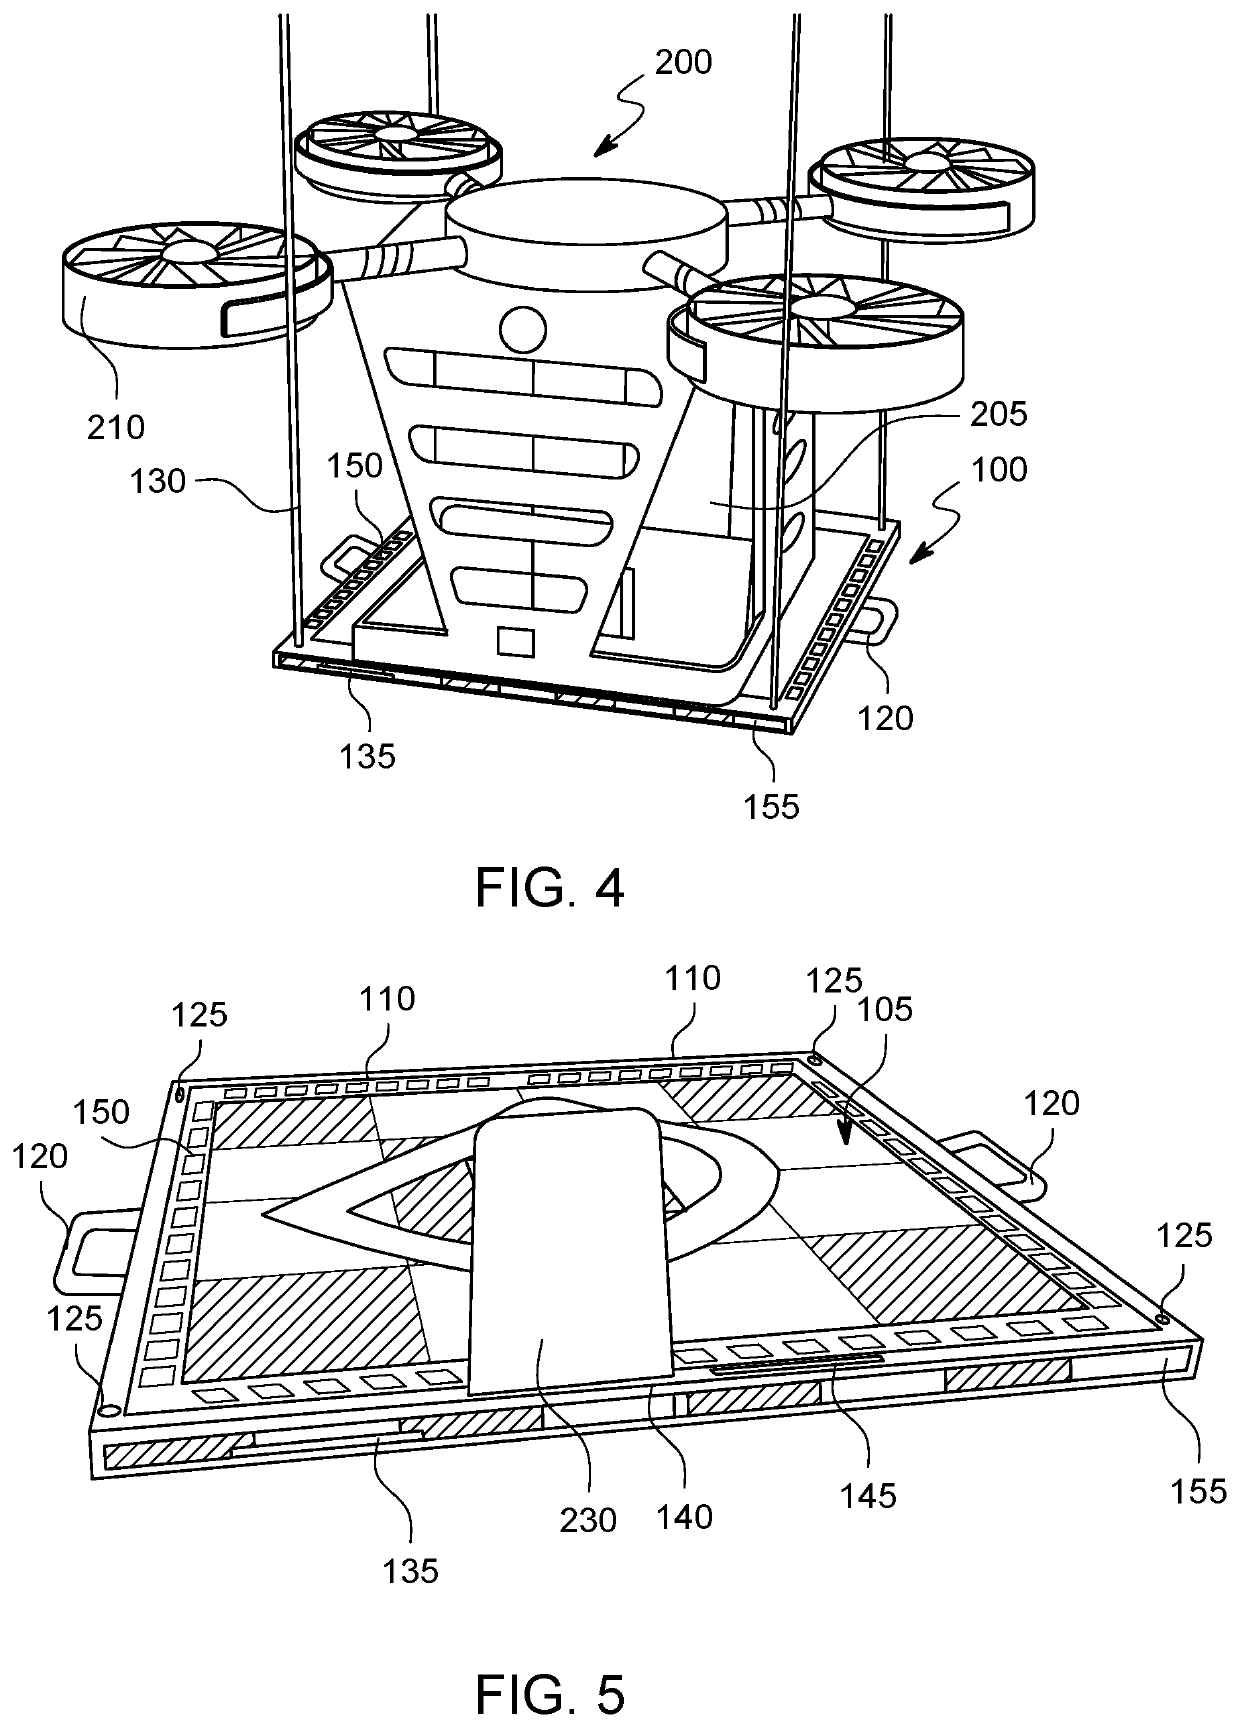 Portable landing and take-off pad for an unmanned air aerial vehicle